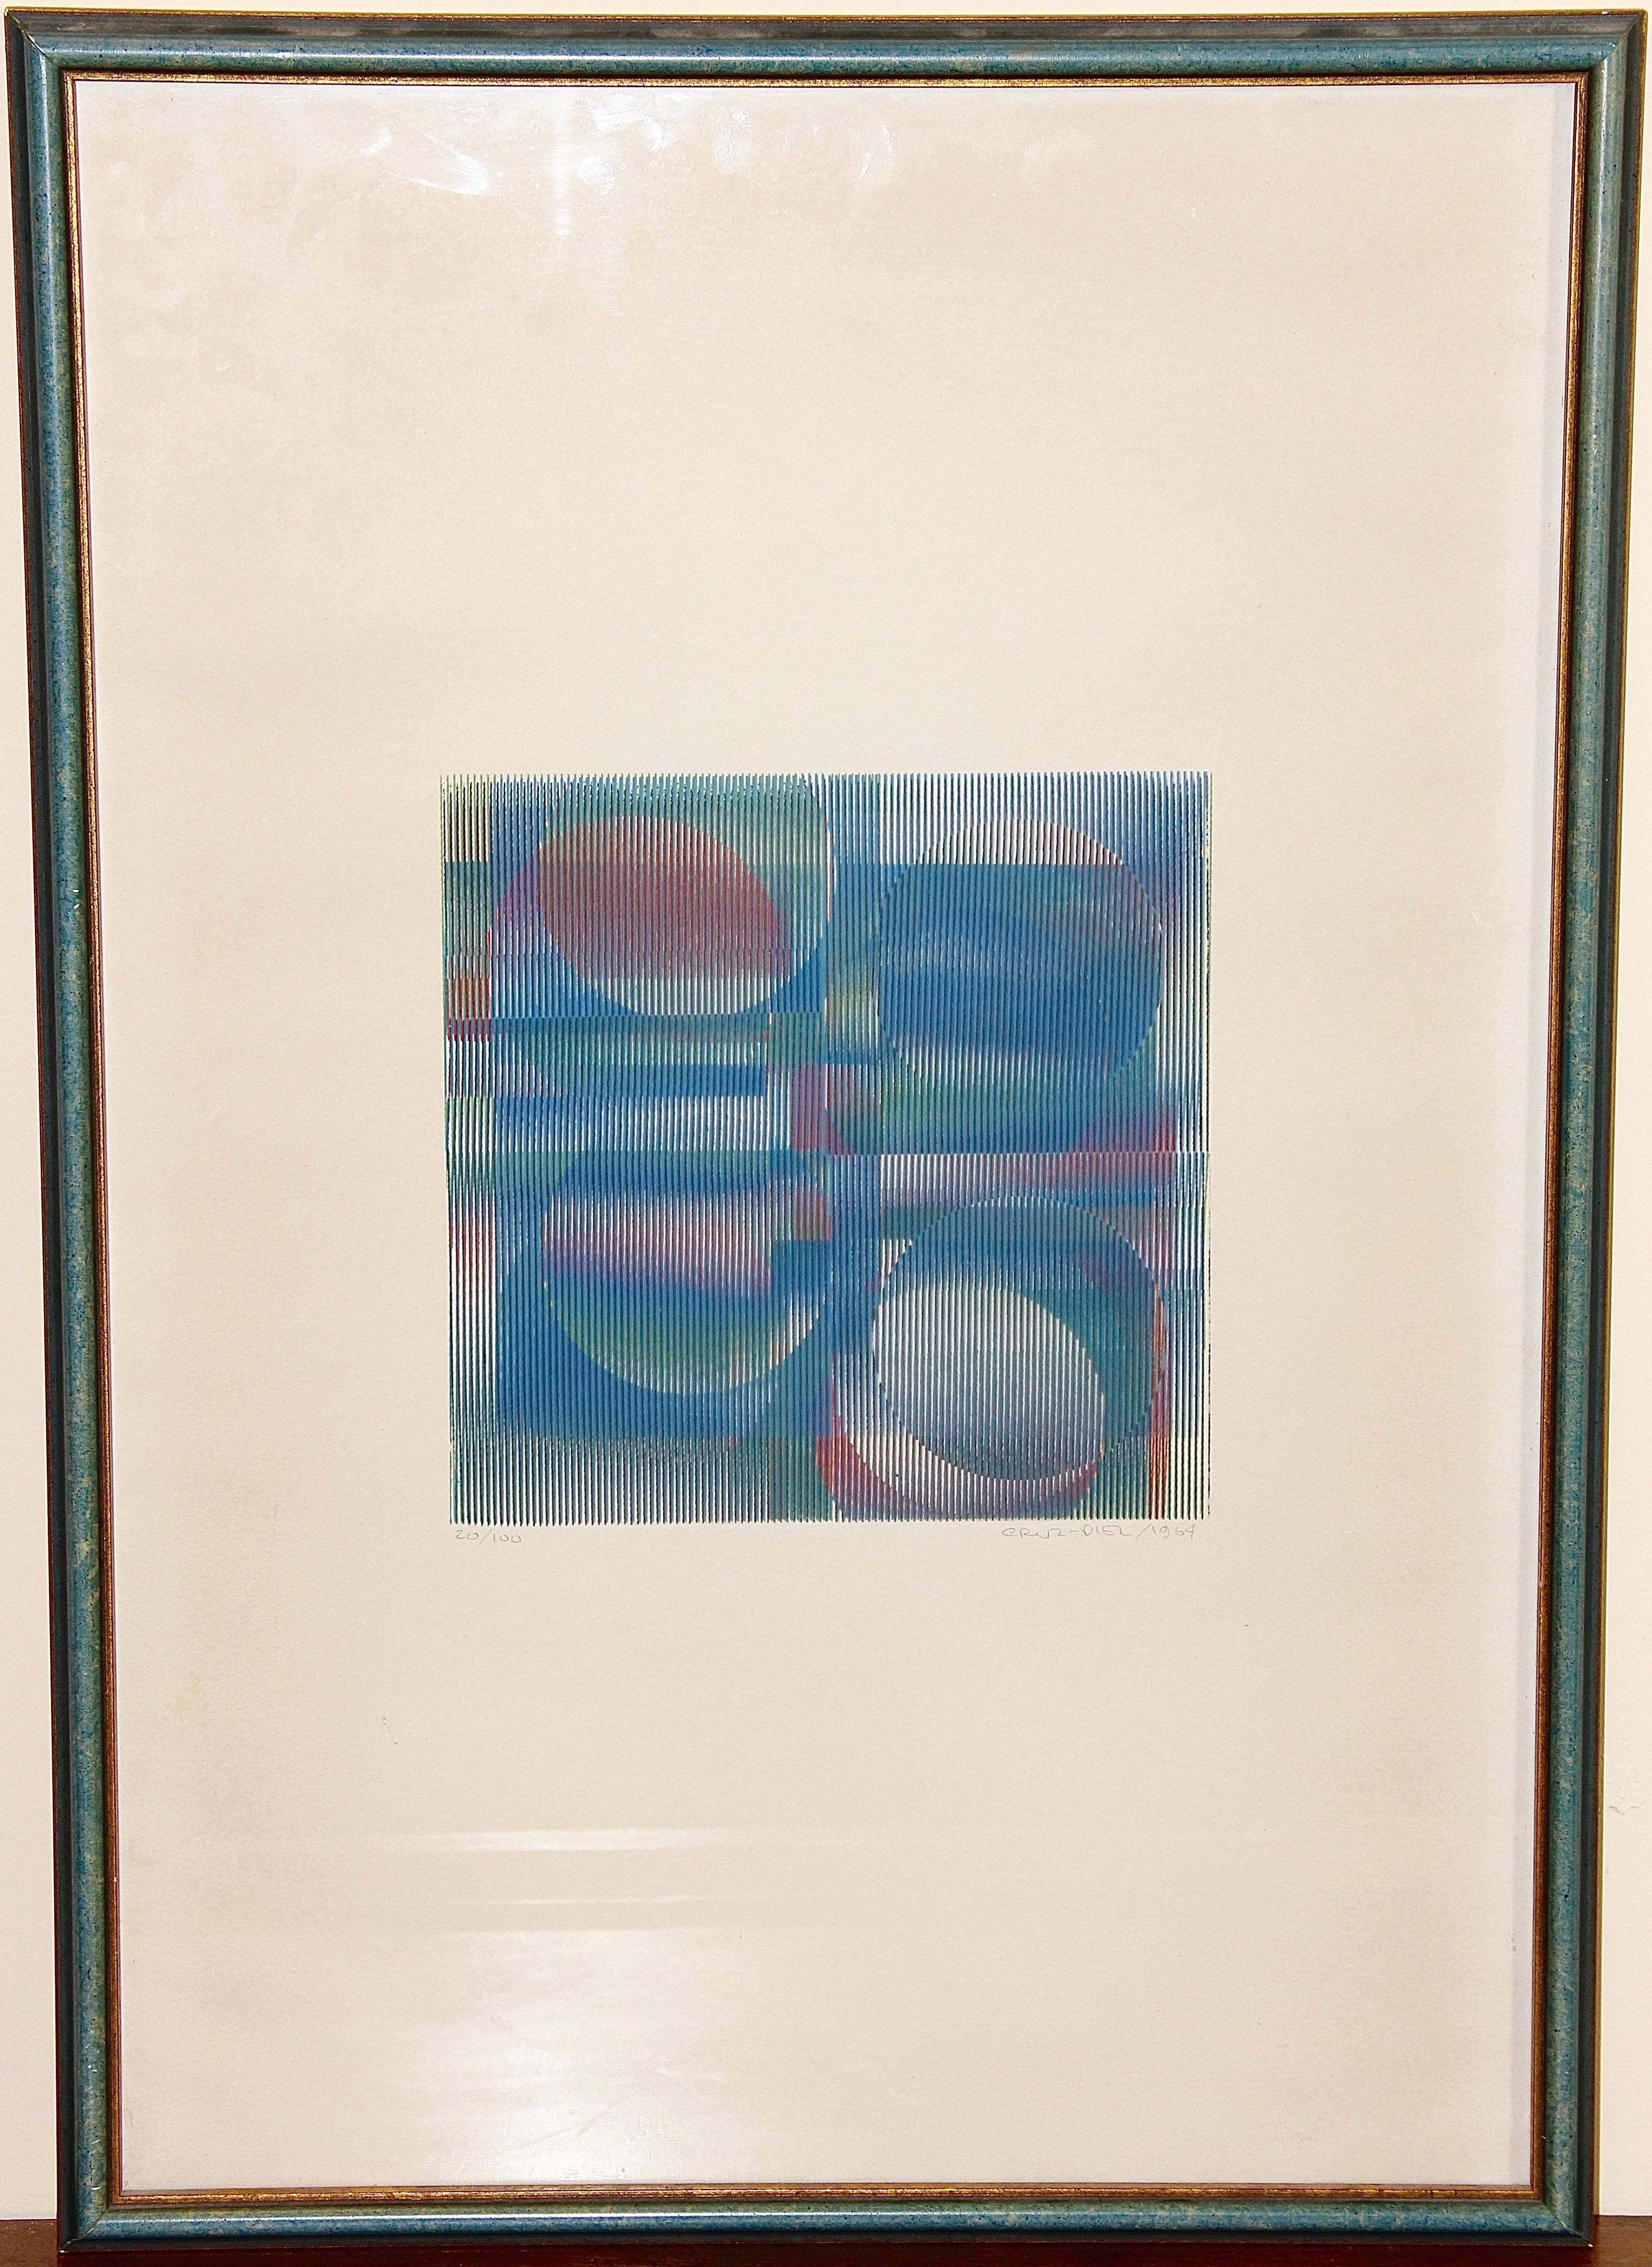 Untitled, 1964, Signed, dated and numbered - Painting by Carlos Cruz-Diez